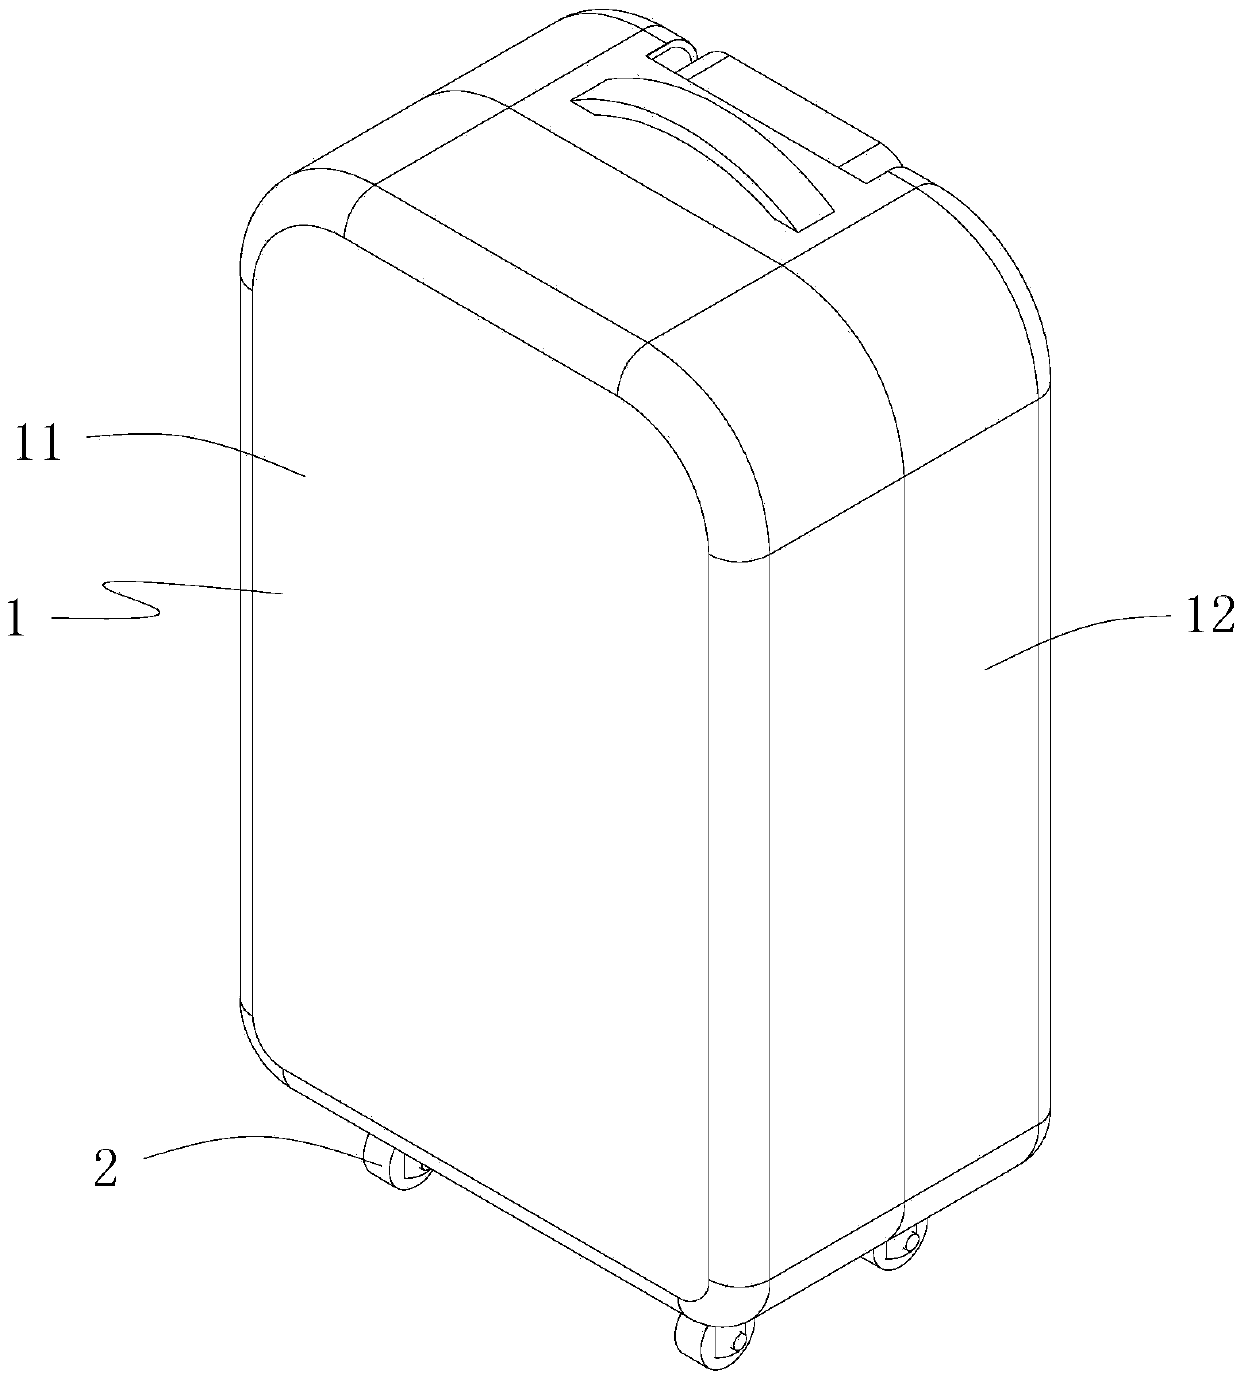 Luggage case based on convenient carrying of wet articles